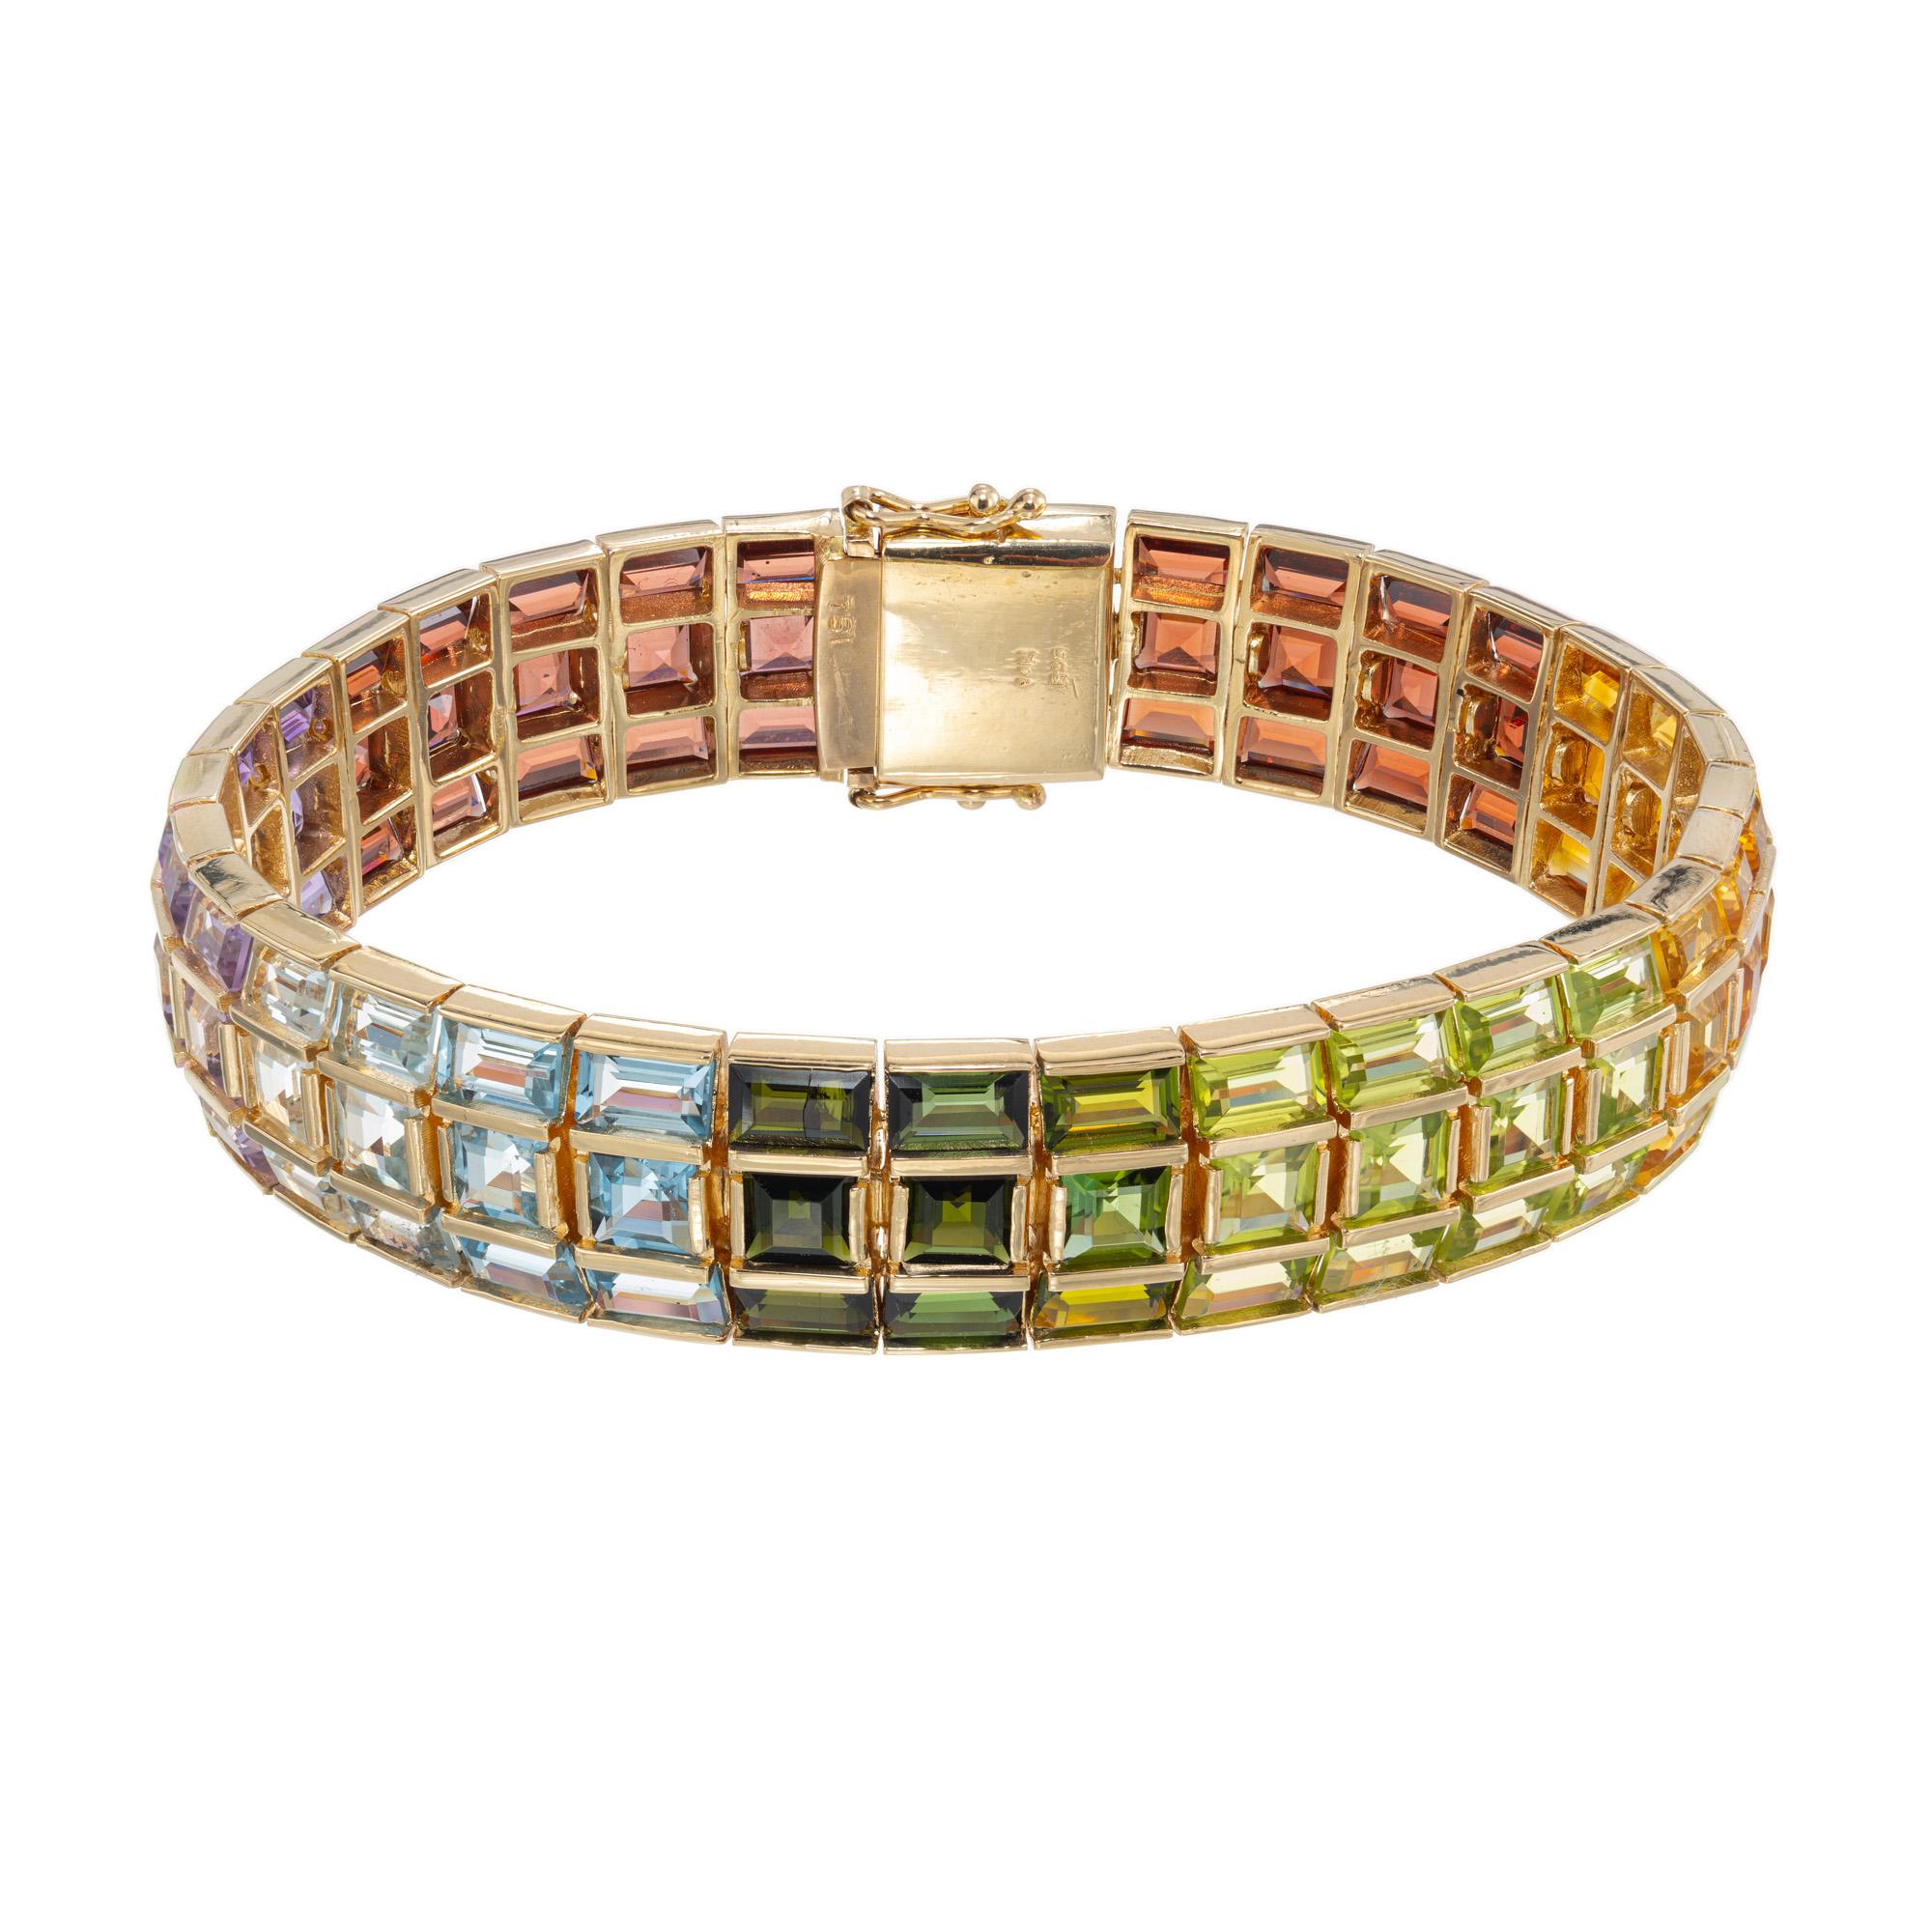 Indulge in the stunning elegance of our 33.00 Carat Garnet Citrine Amethyst Peridot Topaz Three Row Bracelet. This exquisite piece of jewelry is a true testament to the beauty and craftsmanship of nature. Each row showcases a dazzling array of